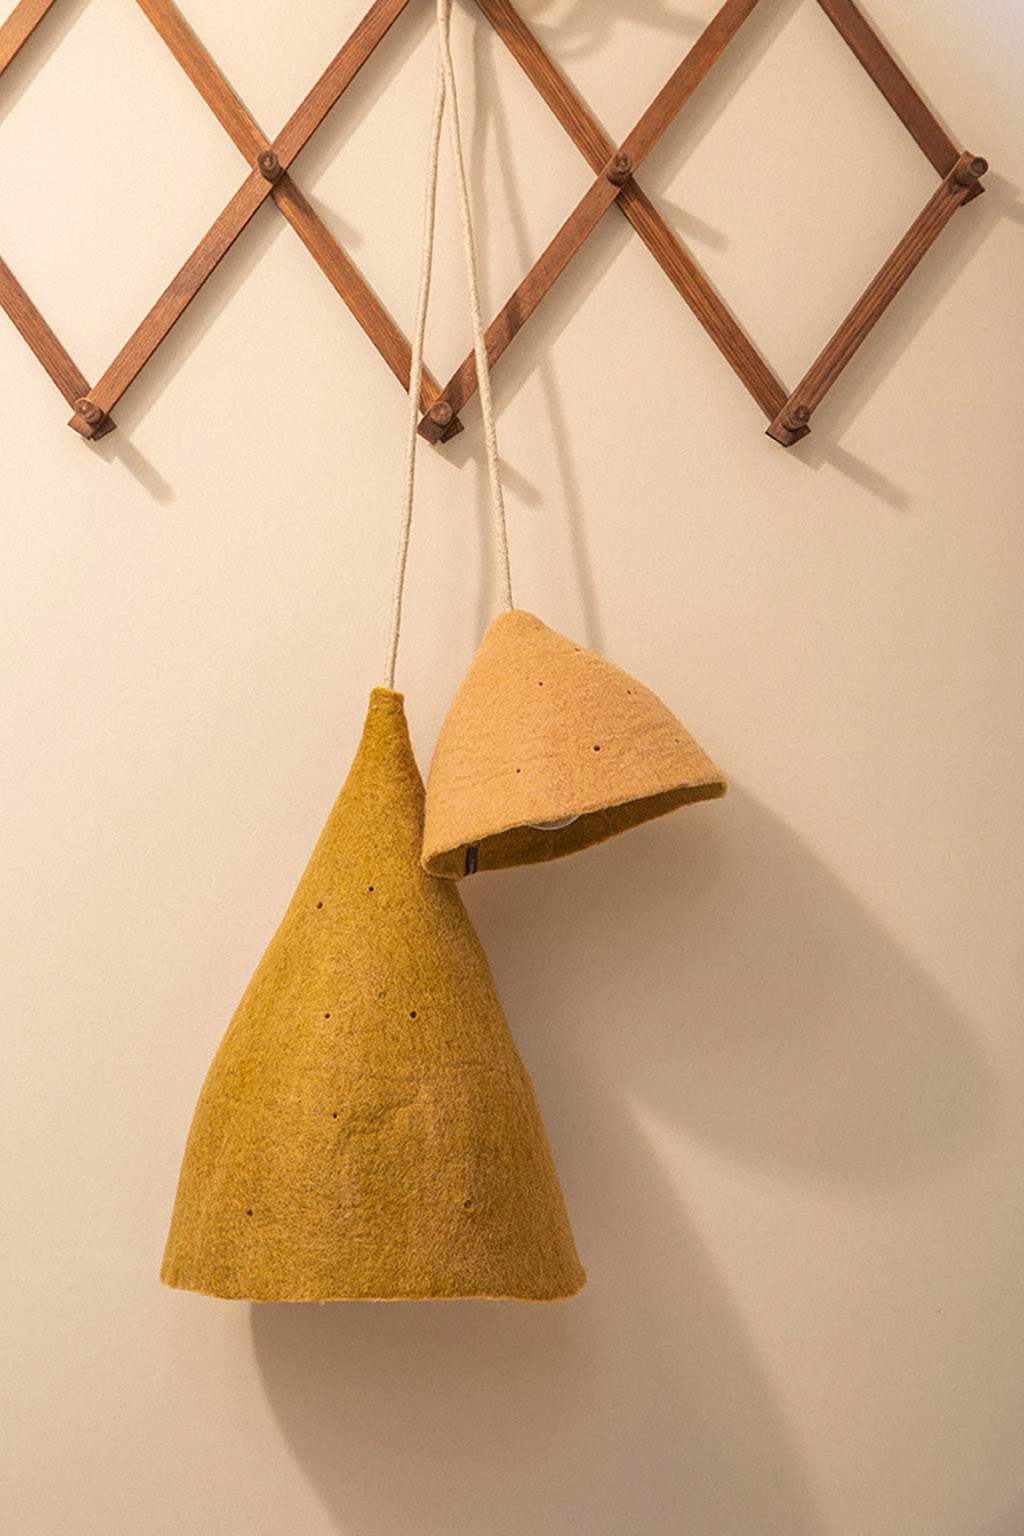 Two felted wool lampshades hanging in the entrance